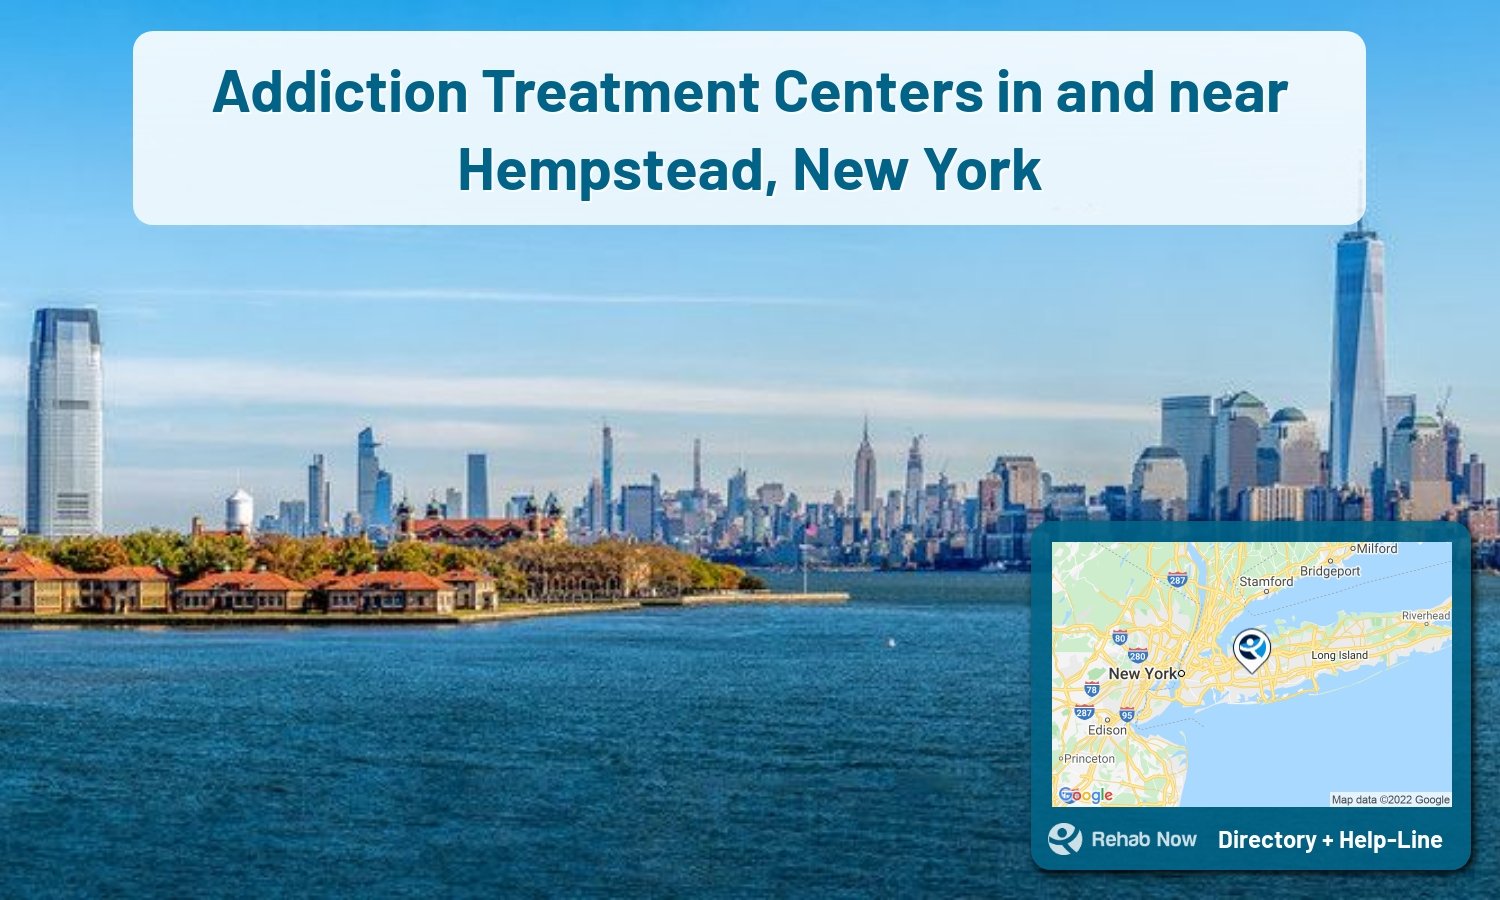 Our experts can help you find treatment now in Hempstead, New York. We list drug rehab and alcohol centers in New York.